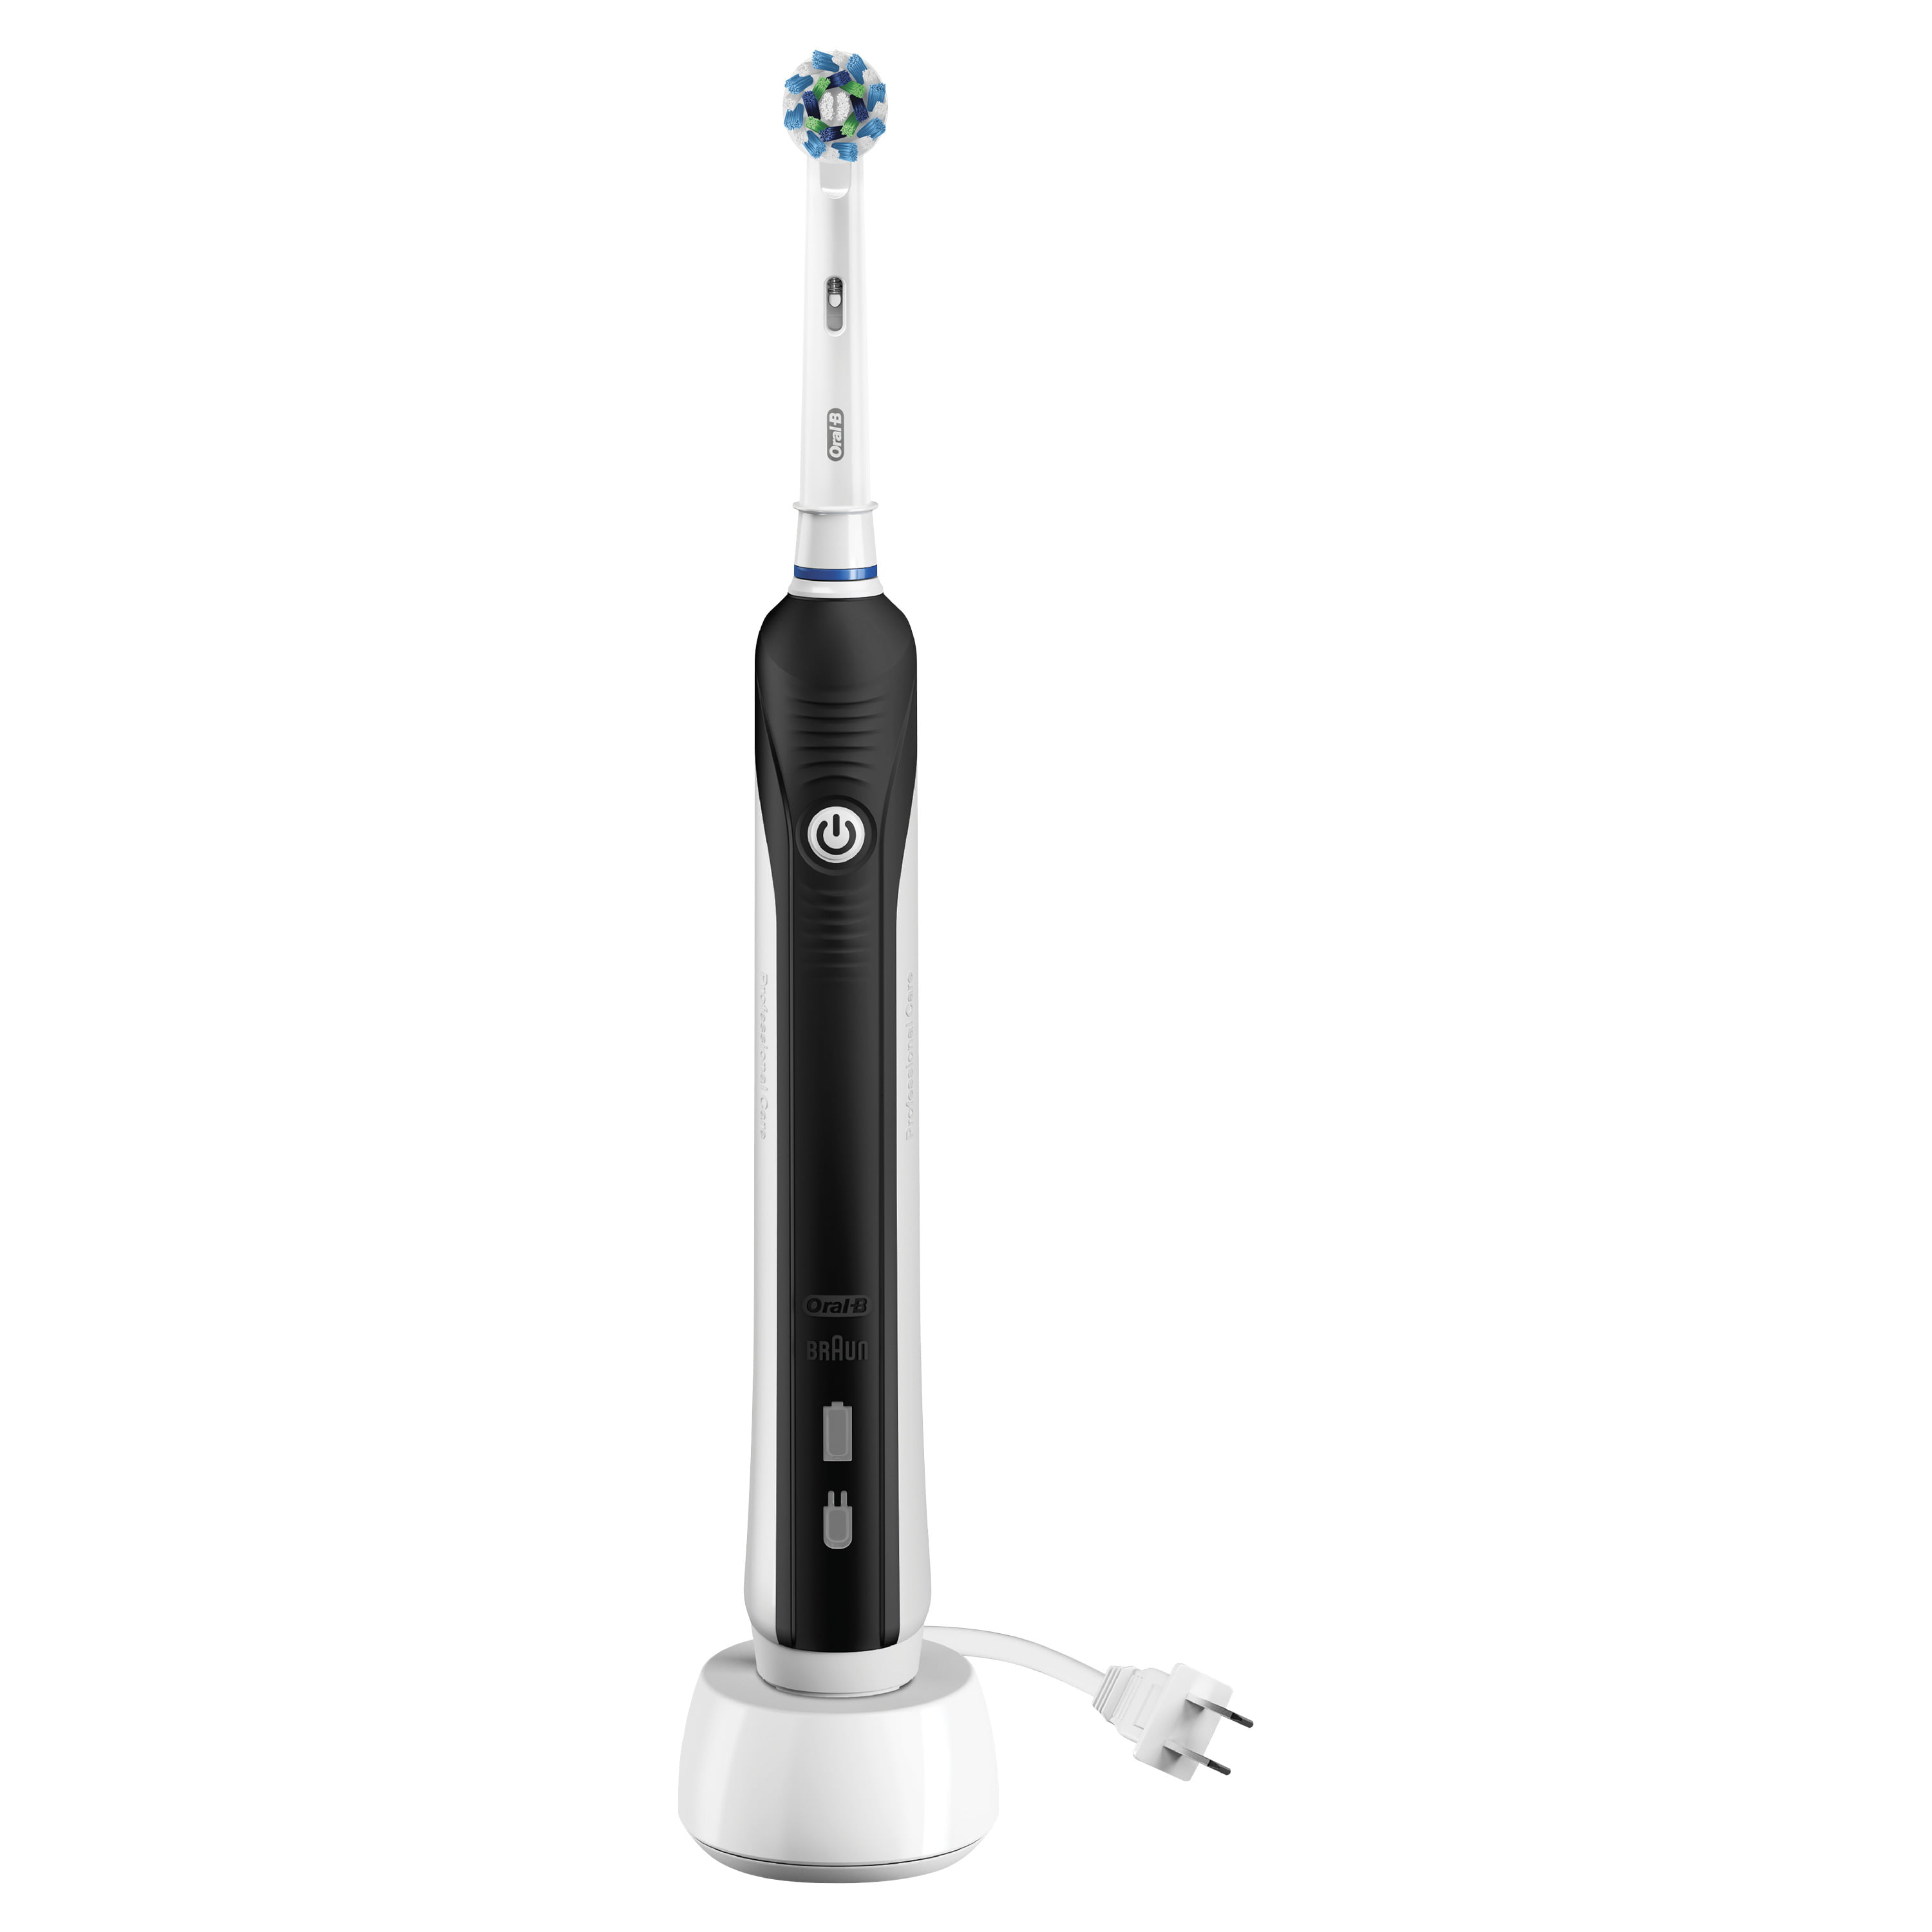 oral-b-1000-5-rebate-available-crossaction-electric-toothbrush